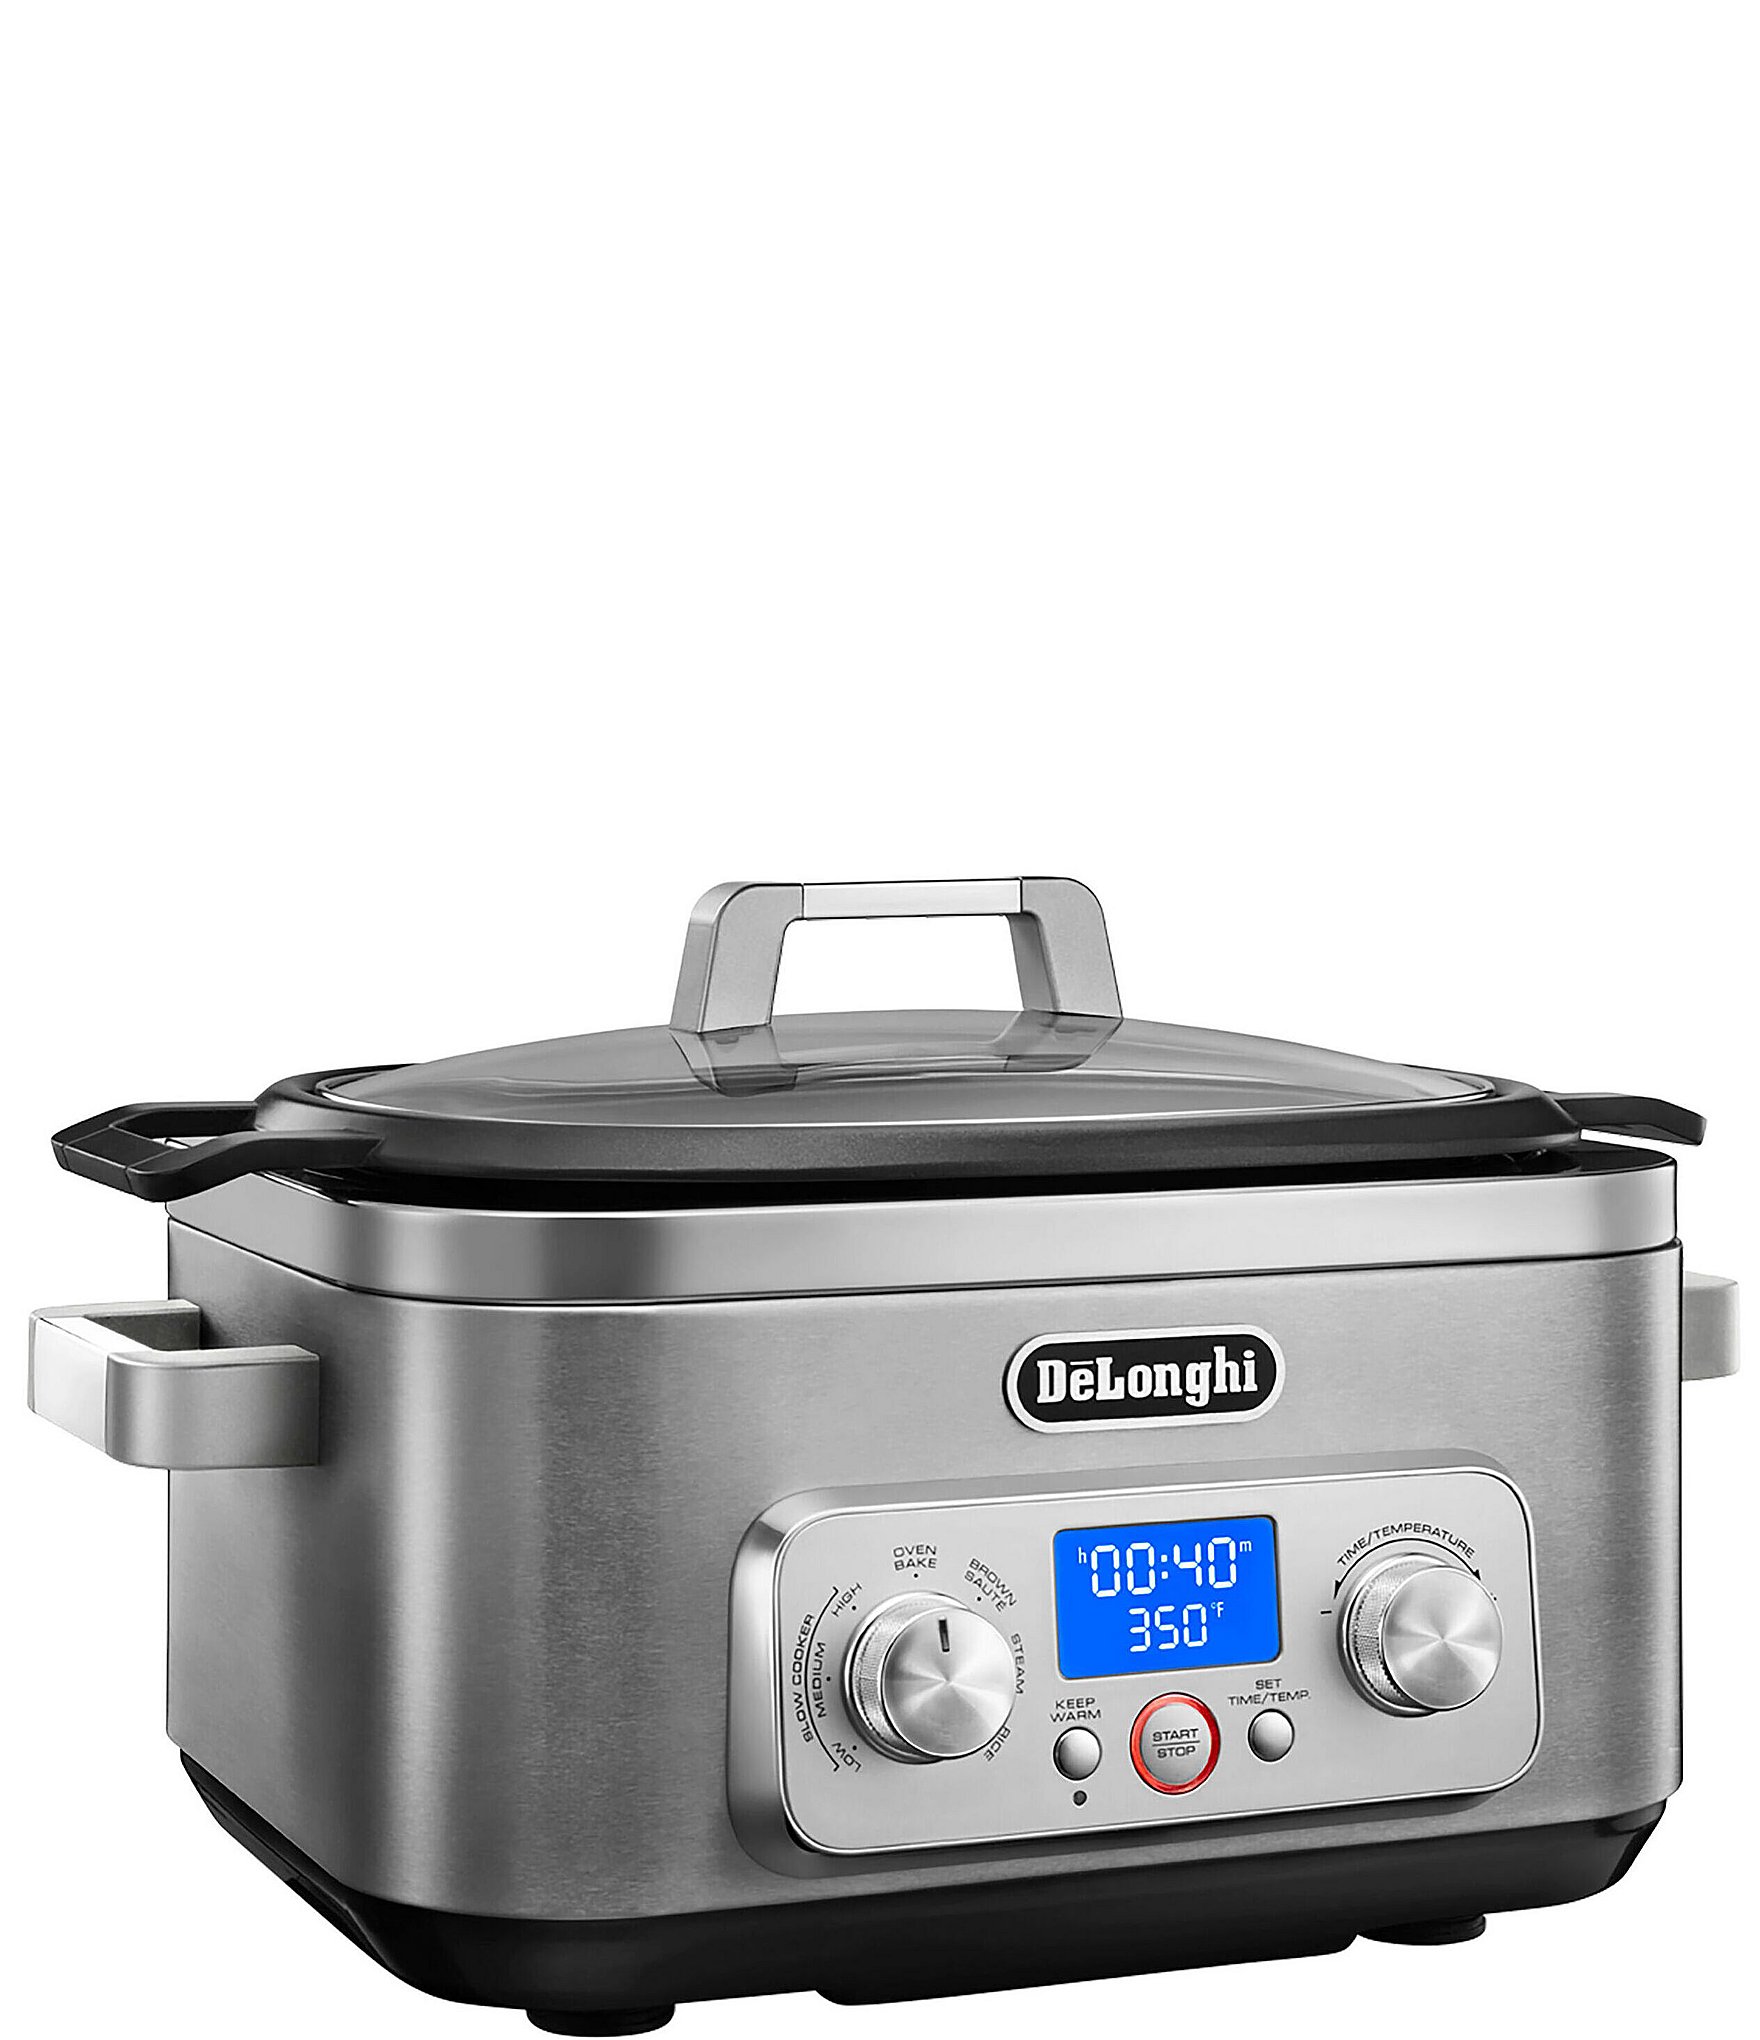 Some Important Features of the All Clad Deluxe Slow Cooker